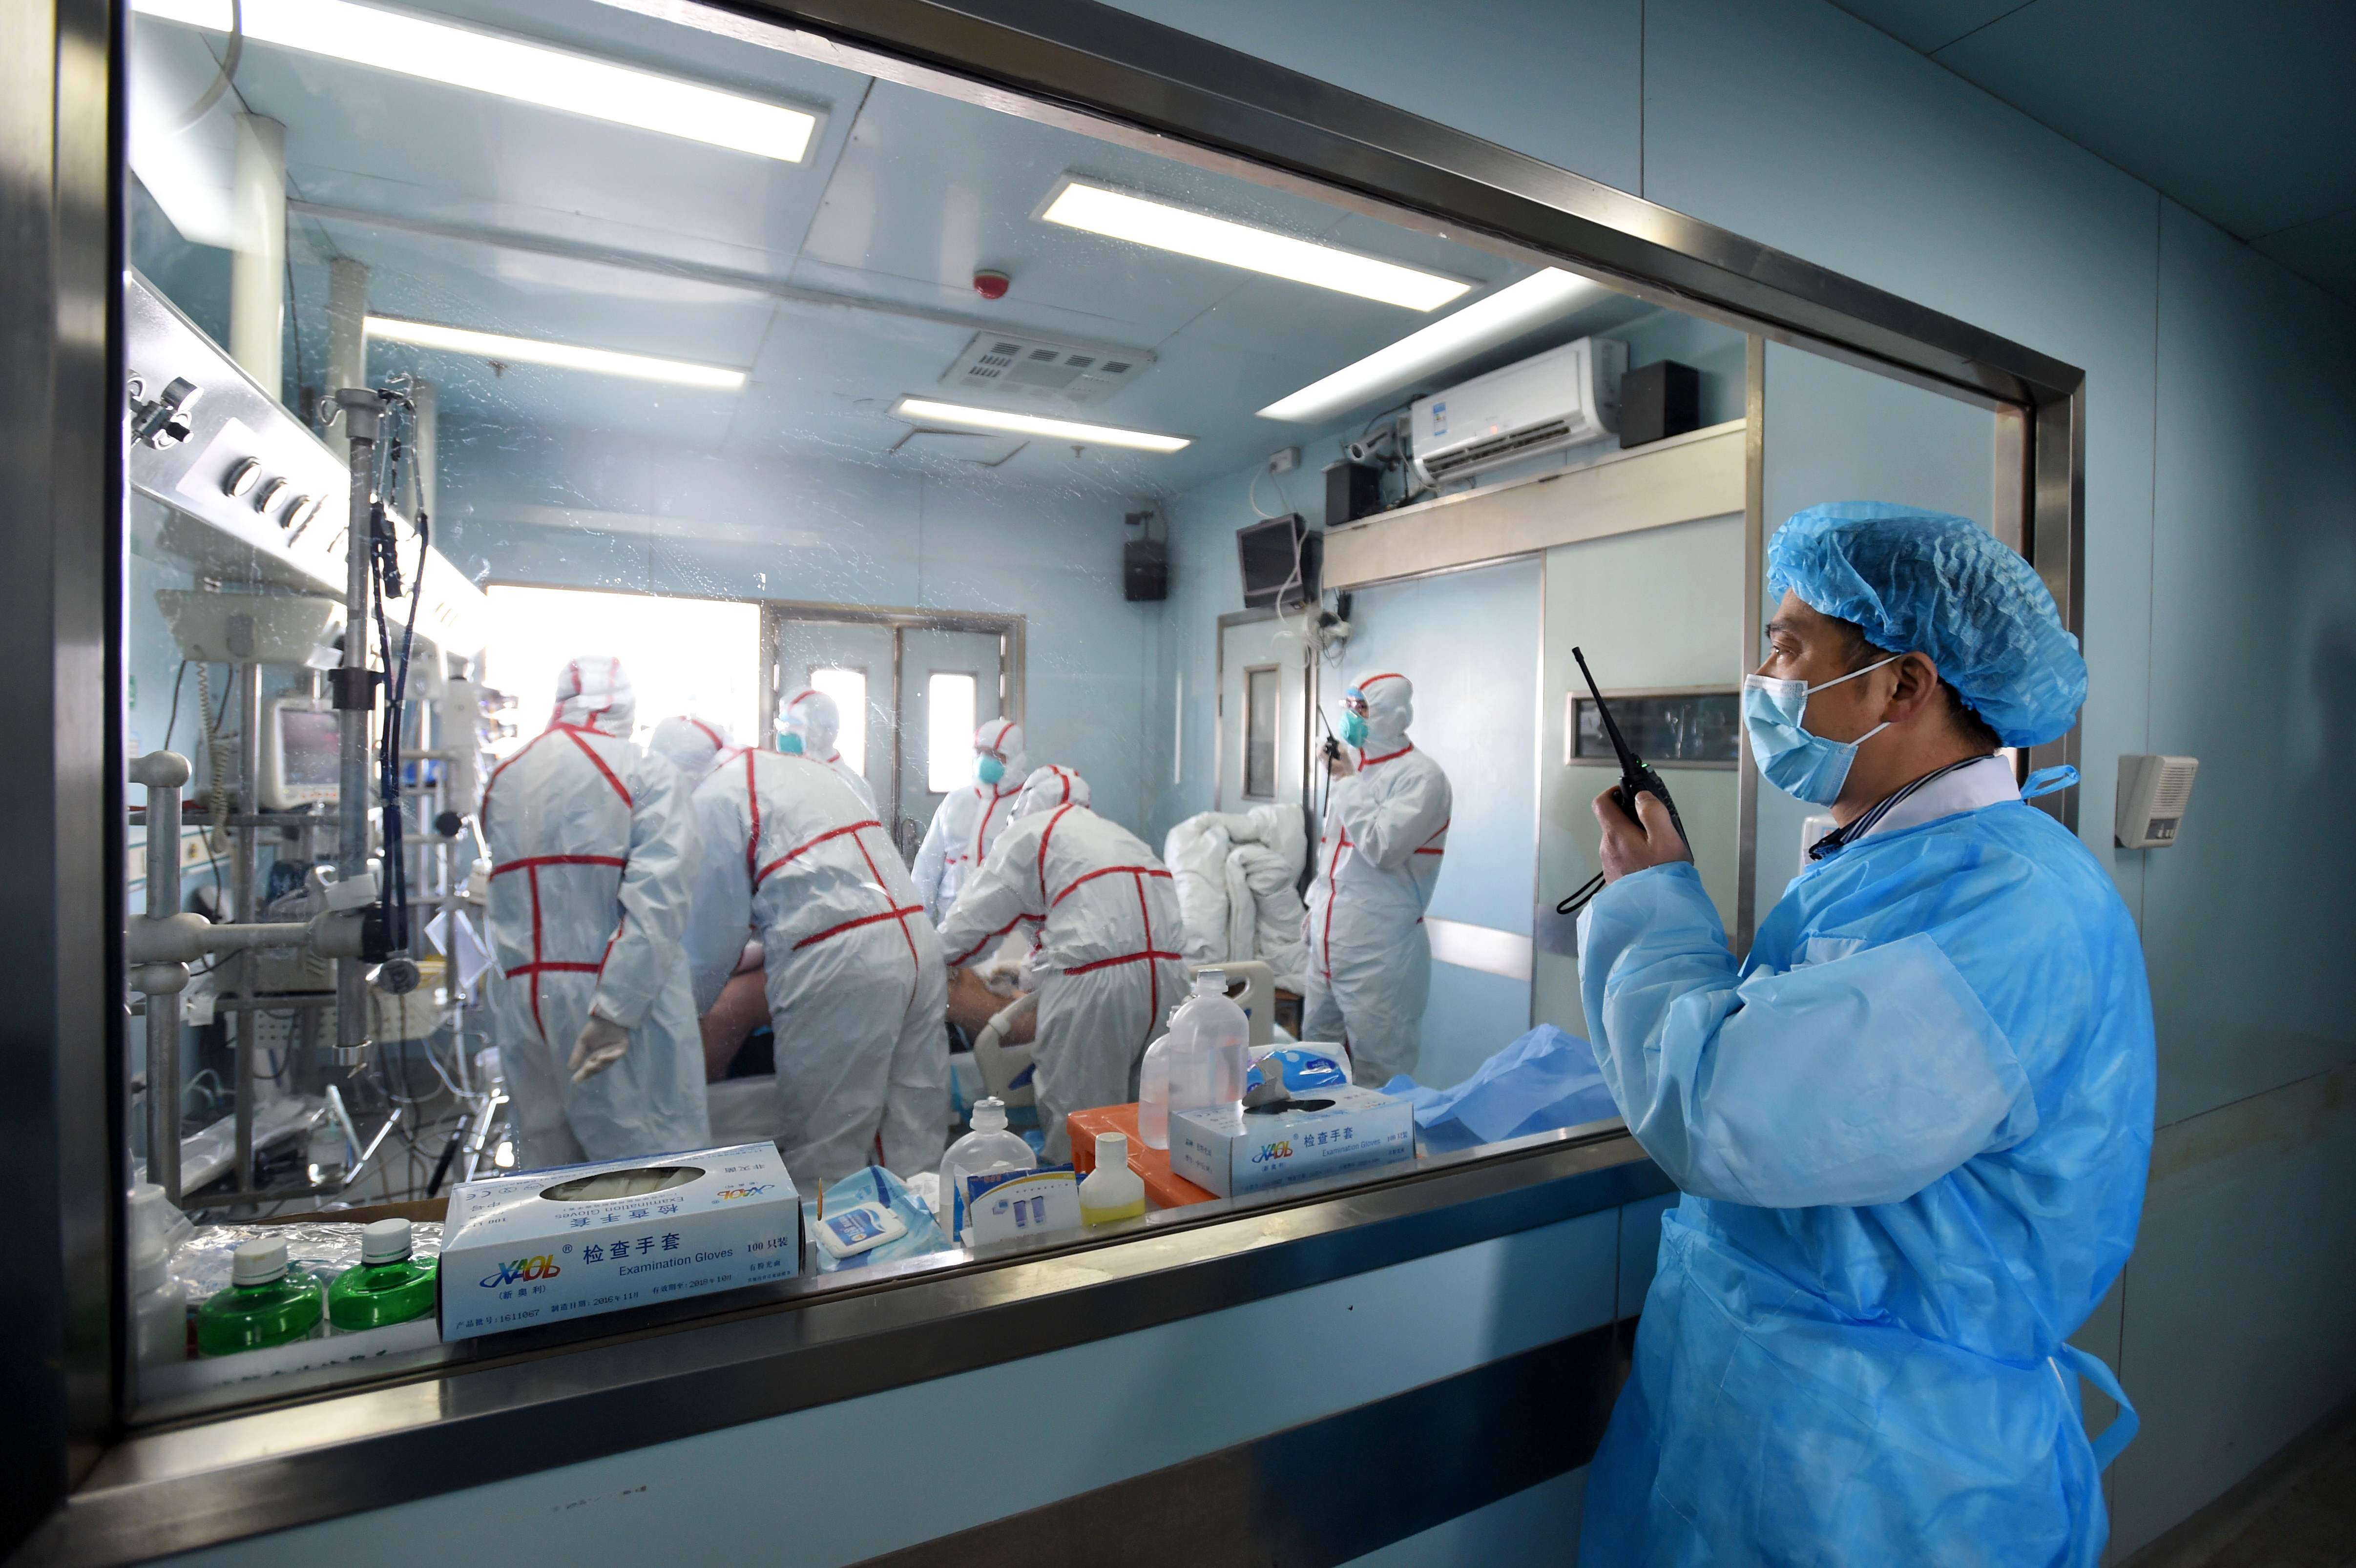 An H7N9 bird flu patient is treated in a hospital in Wuhan, Hubei province. Photo: AFP